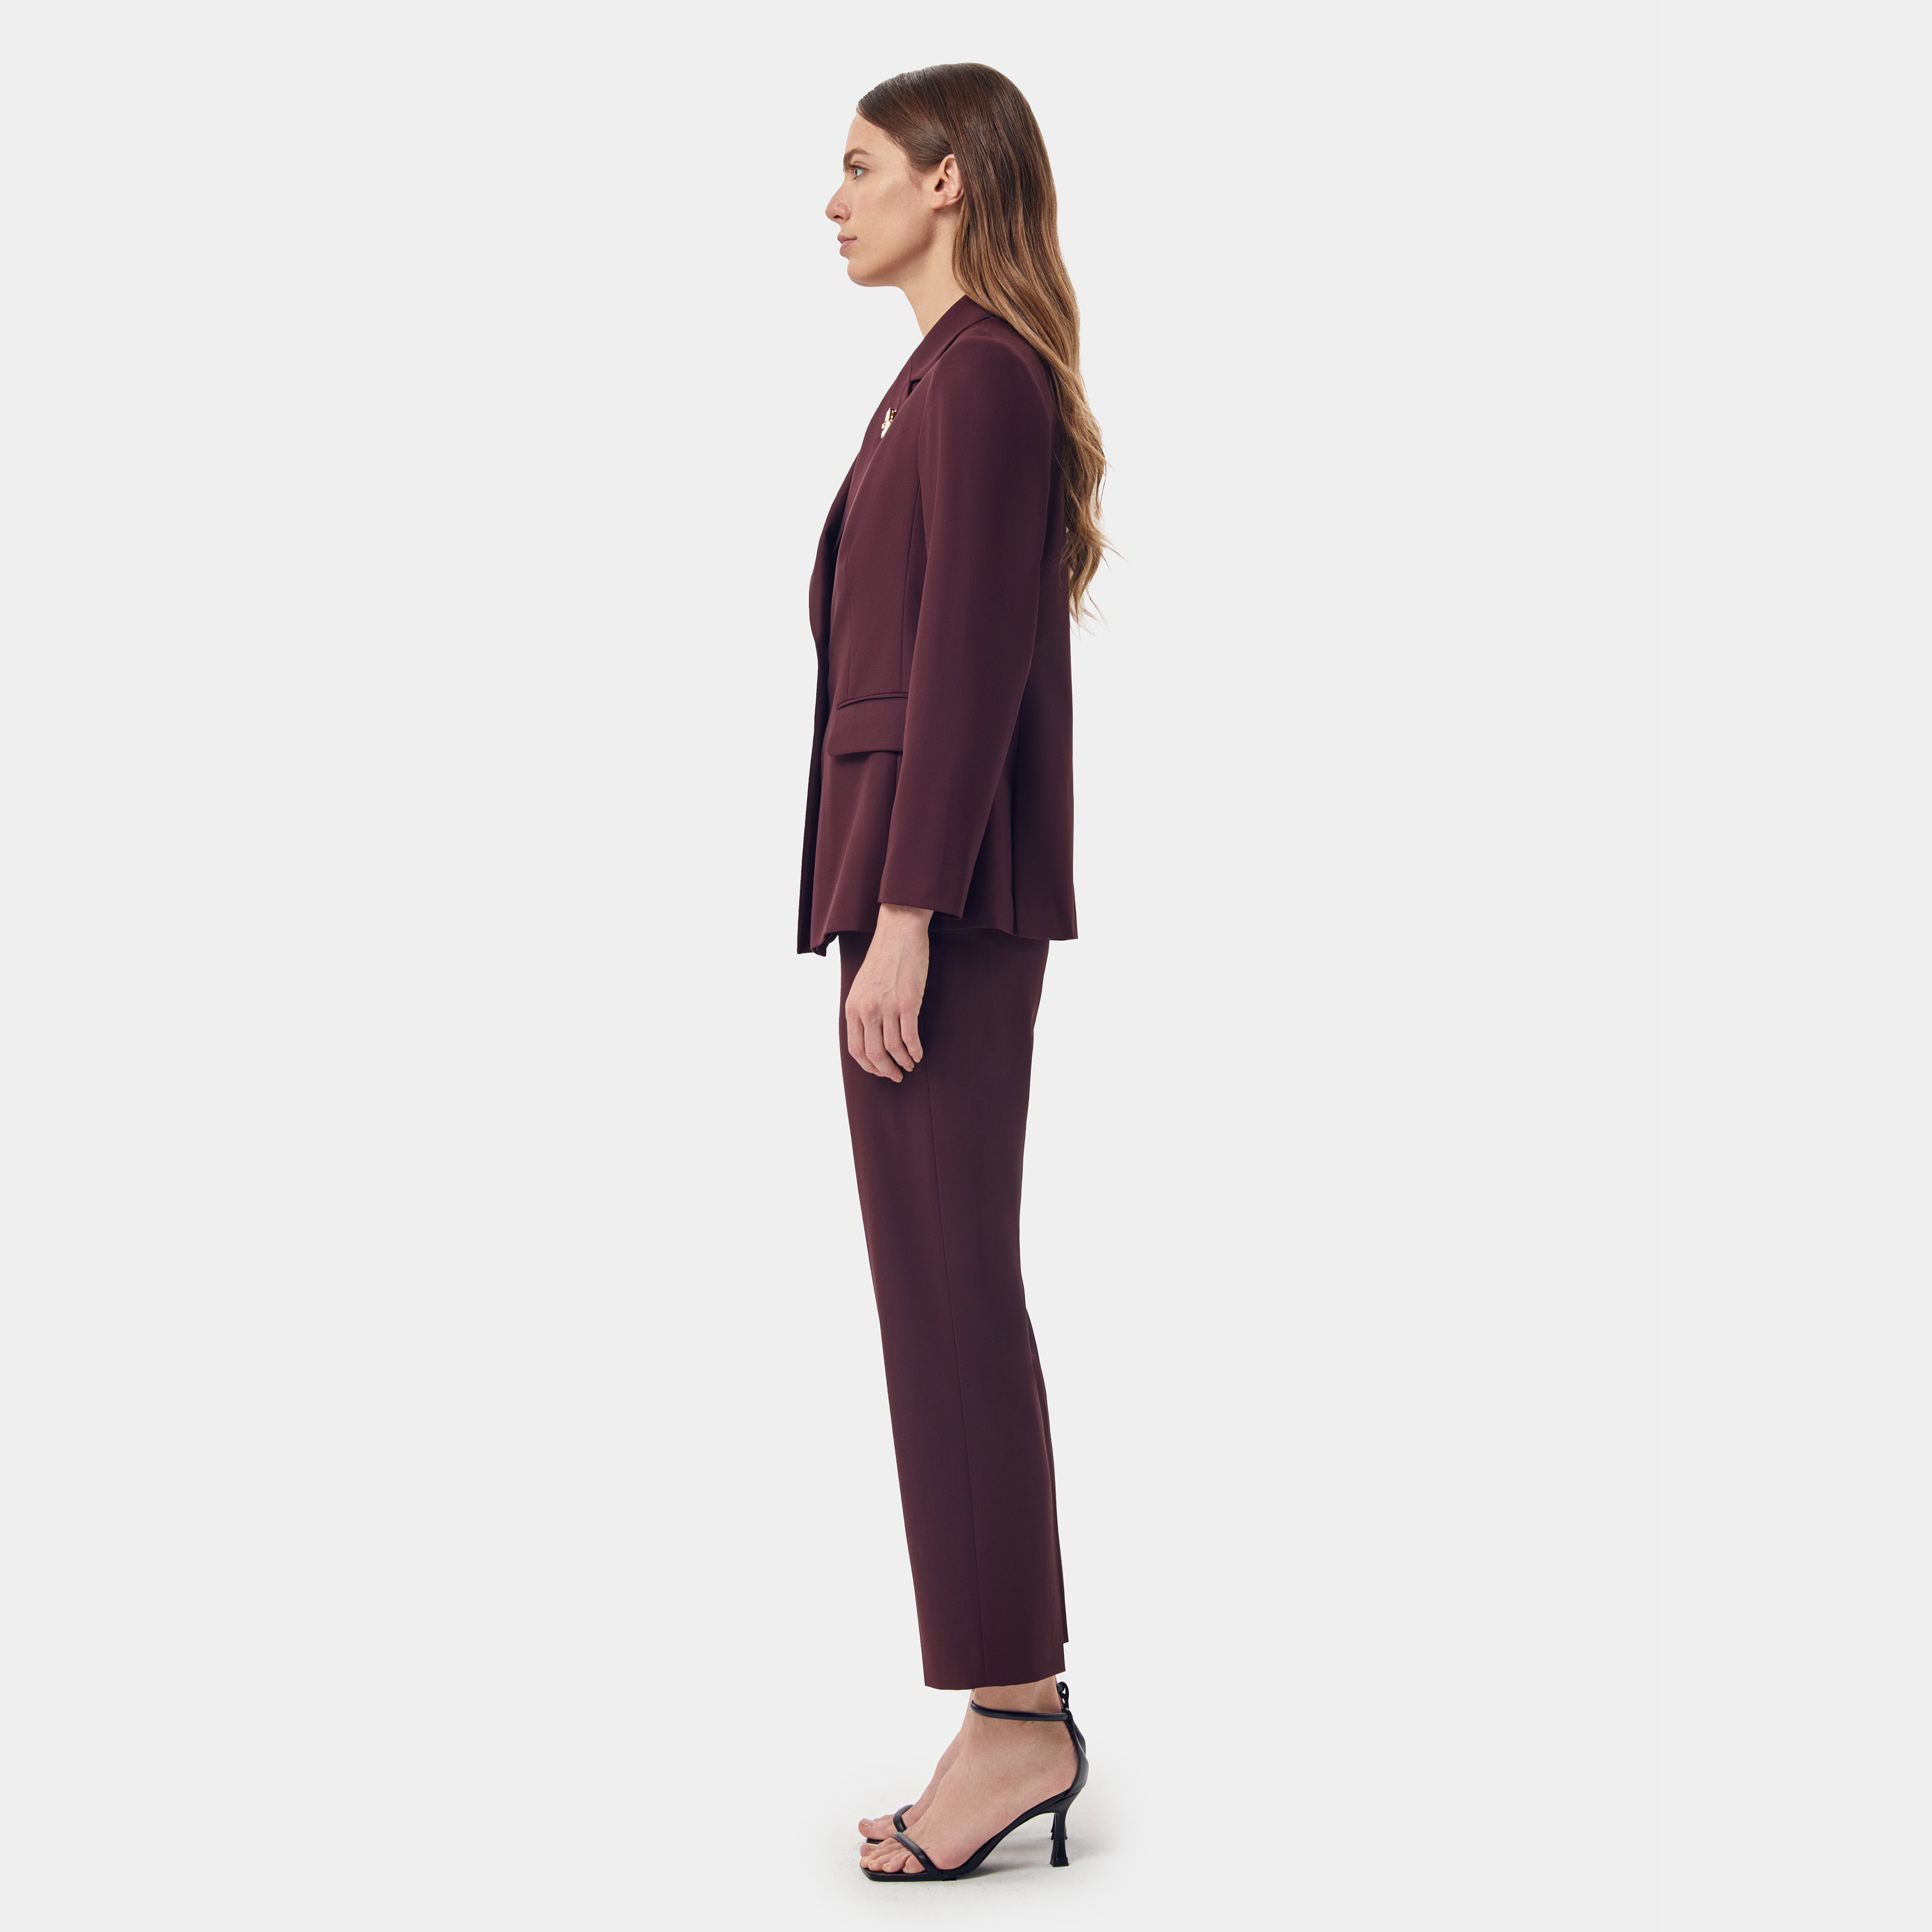 Rum Red Straight Leg Trousers